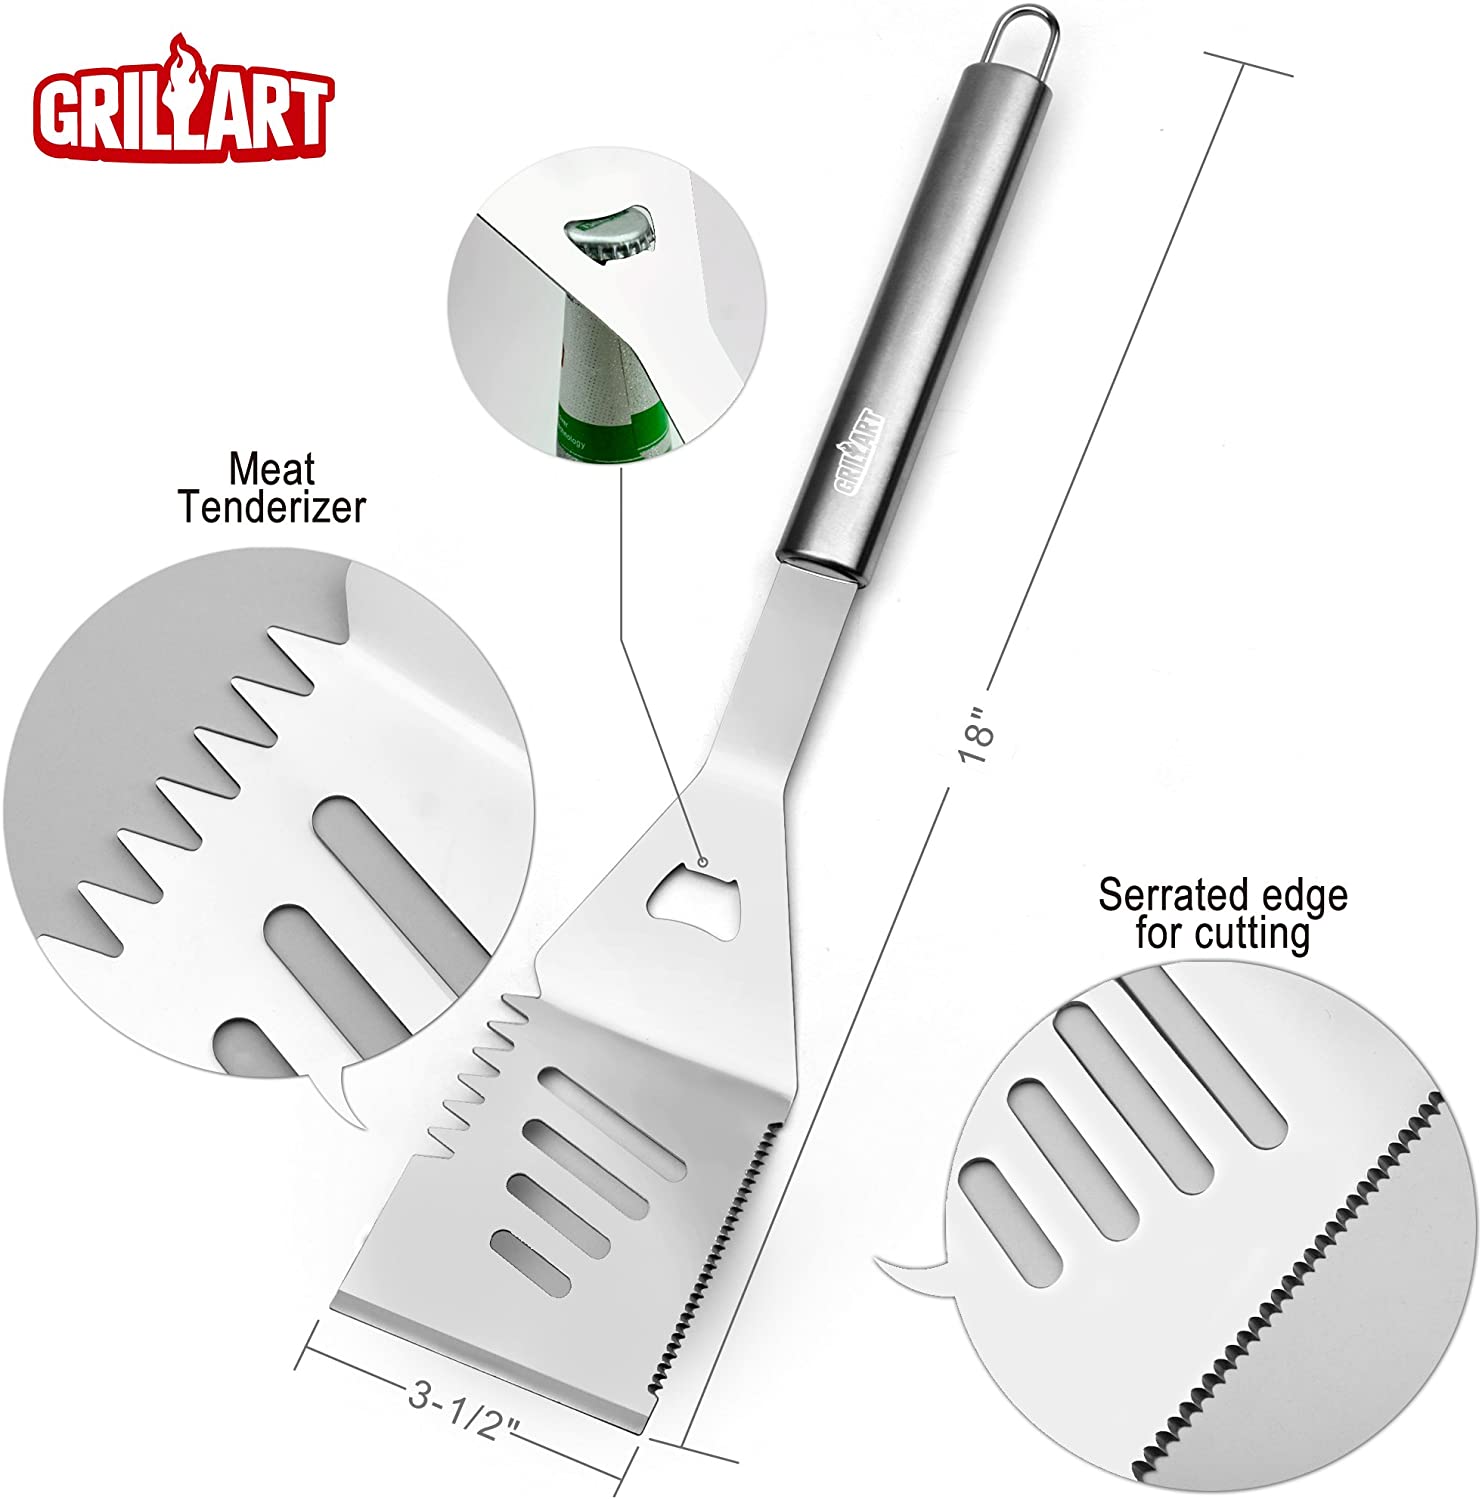 10PCS BBQ Grill Tools Stainless Steel Complete Grill Utensils Set